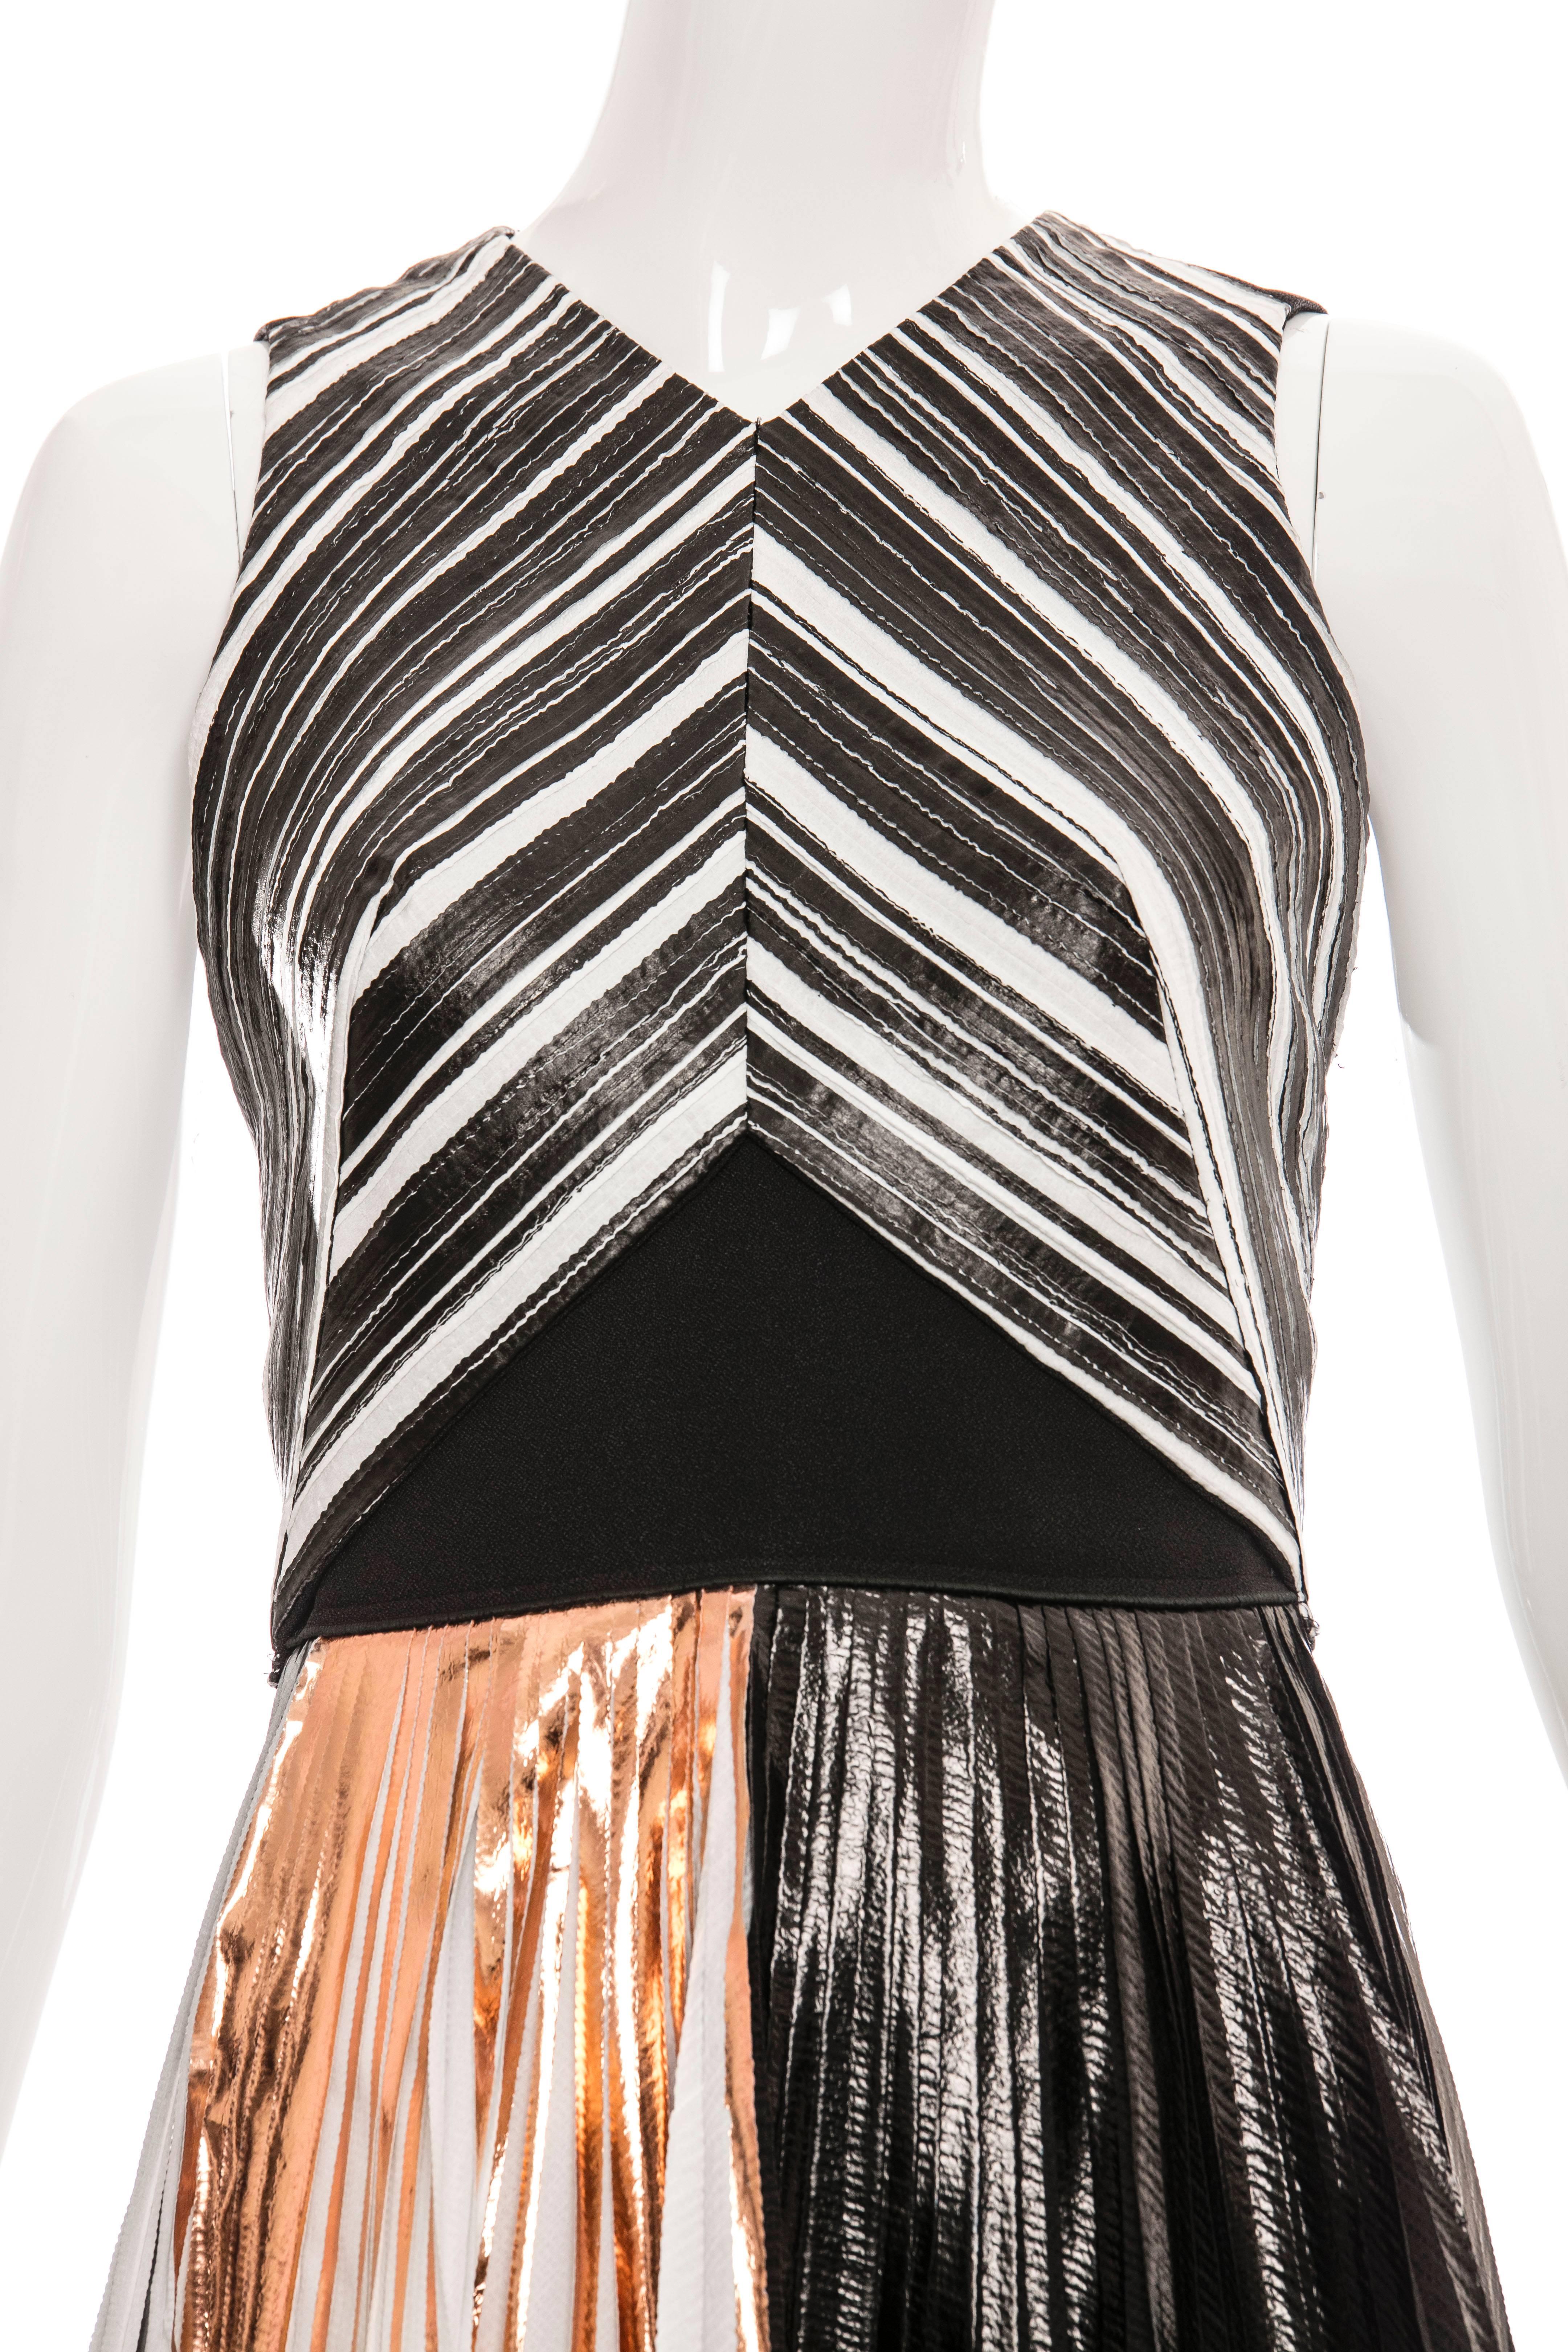 Proenza Schouler Runway Sleeveless Crystal Pleated Dress, Spring 2014 In Excellent Condition For Sale In Cincinnati, OH